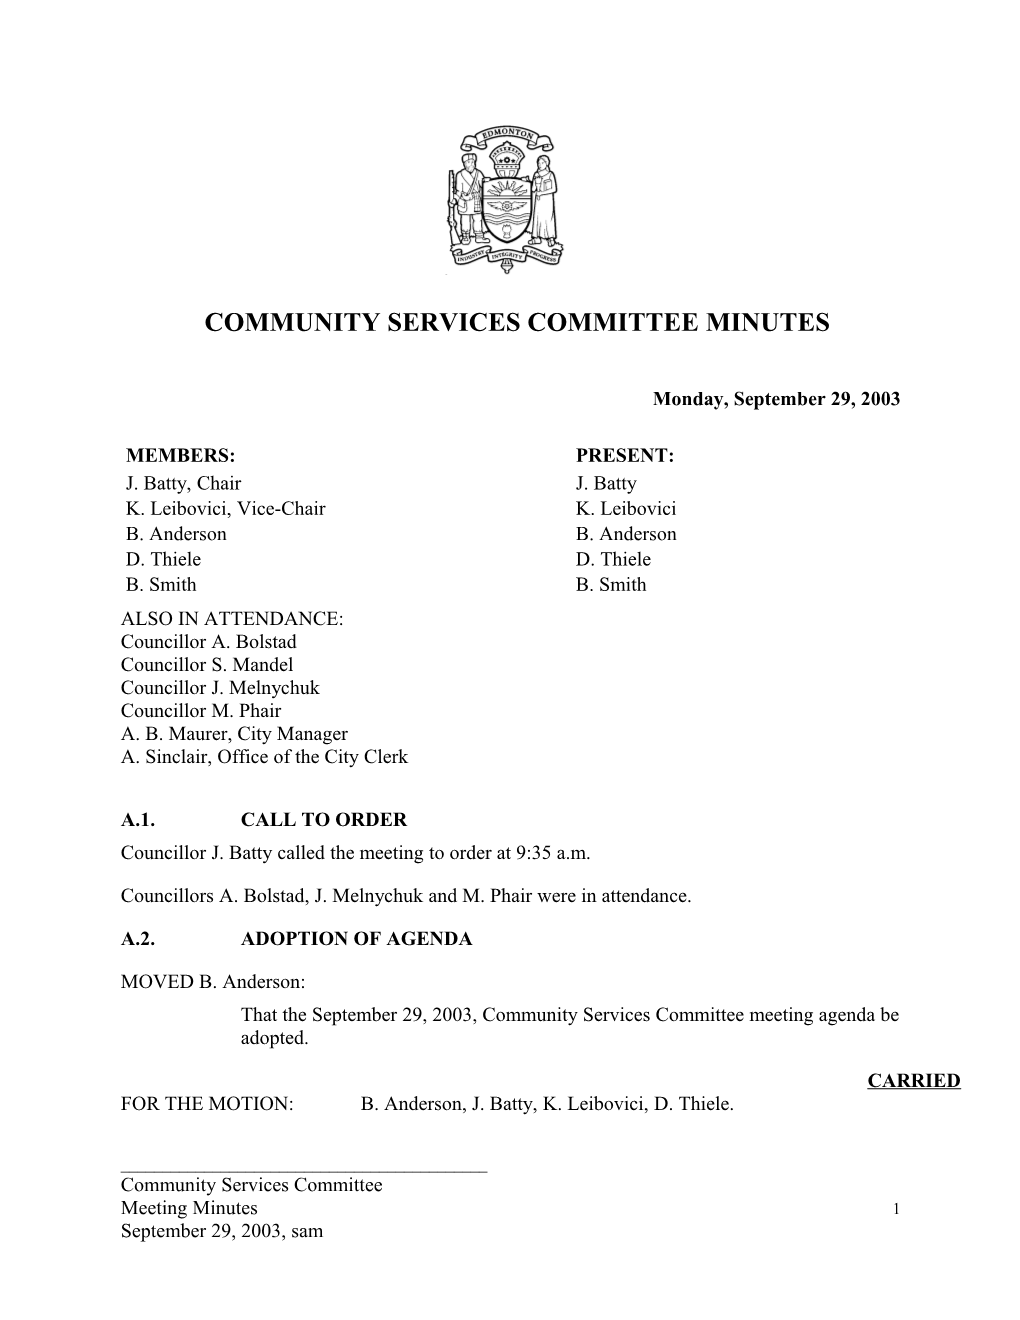 Minutes for Community Services Committee September 29, 2003 Meeting